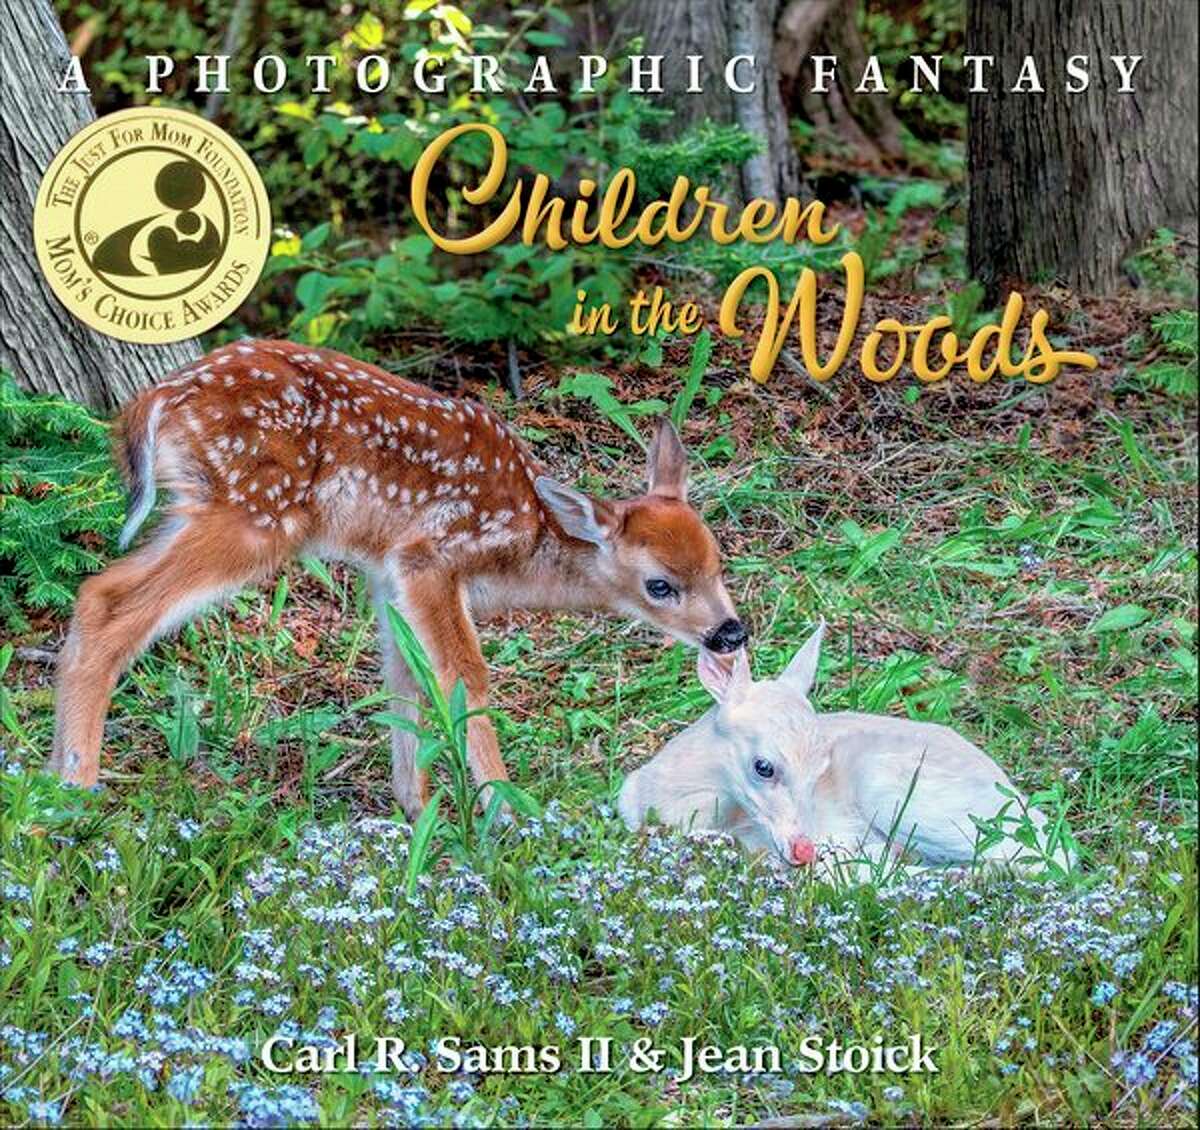 'Children in the Woods' is the newest book by Carl R. Sams II and Jean Stoick. (Photo provided/Carl R. Sams II Photography, Inc.)